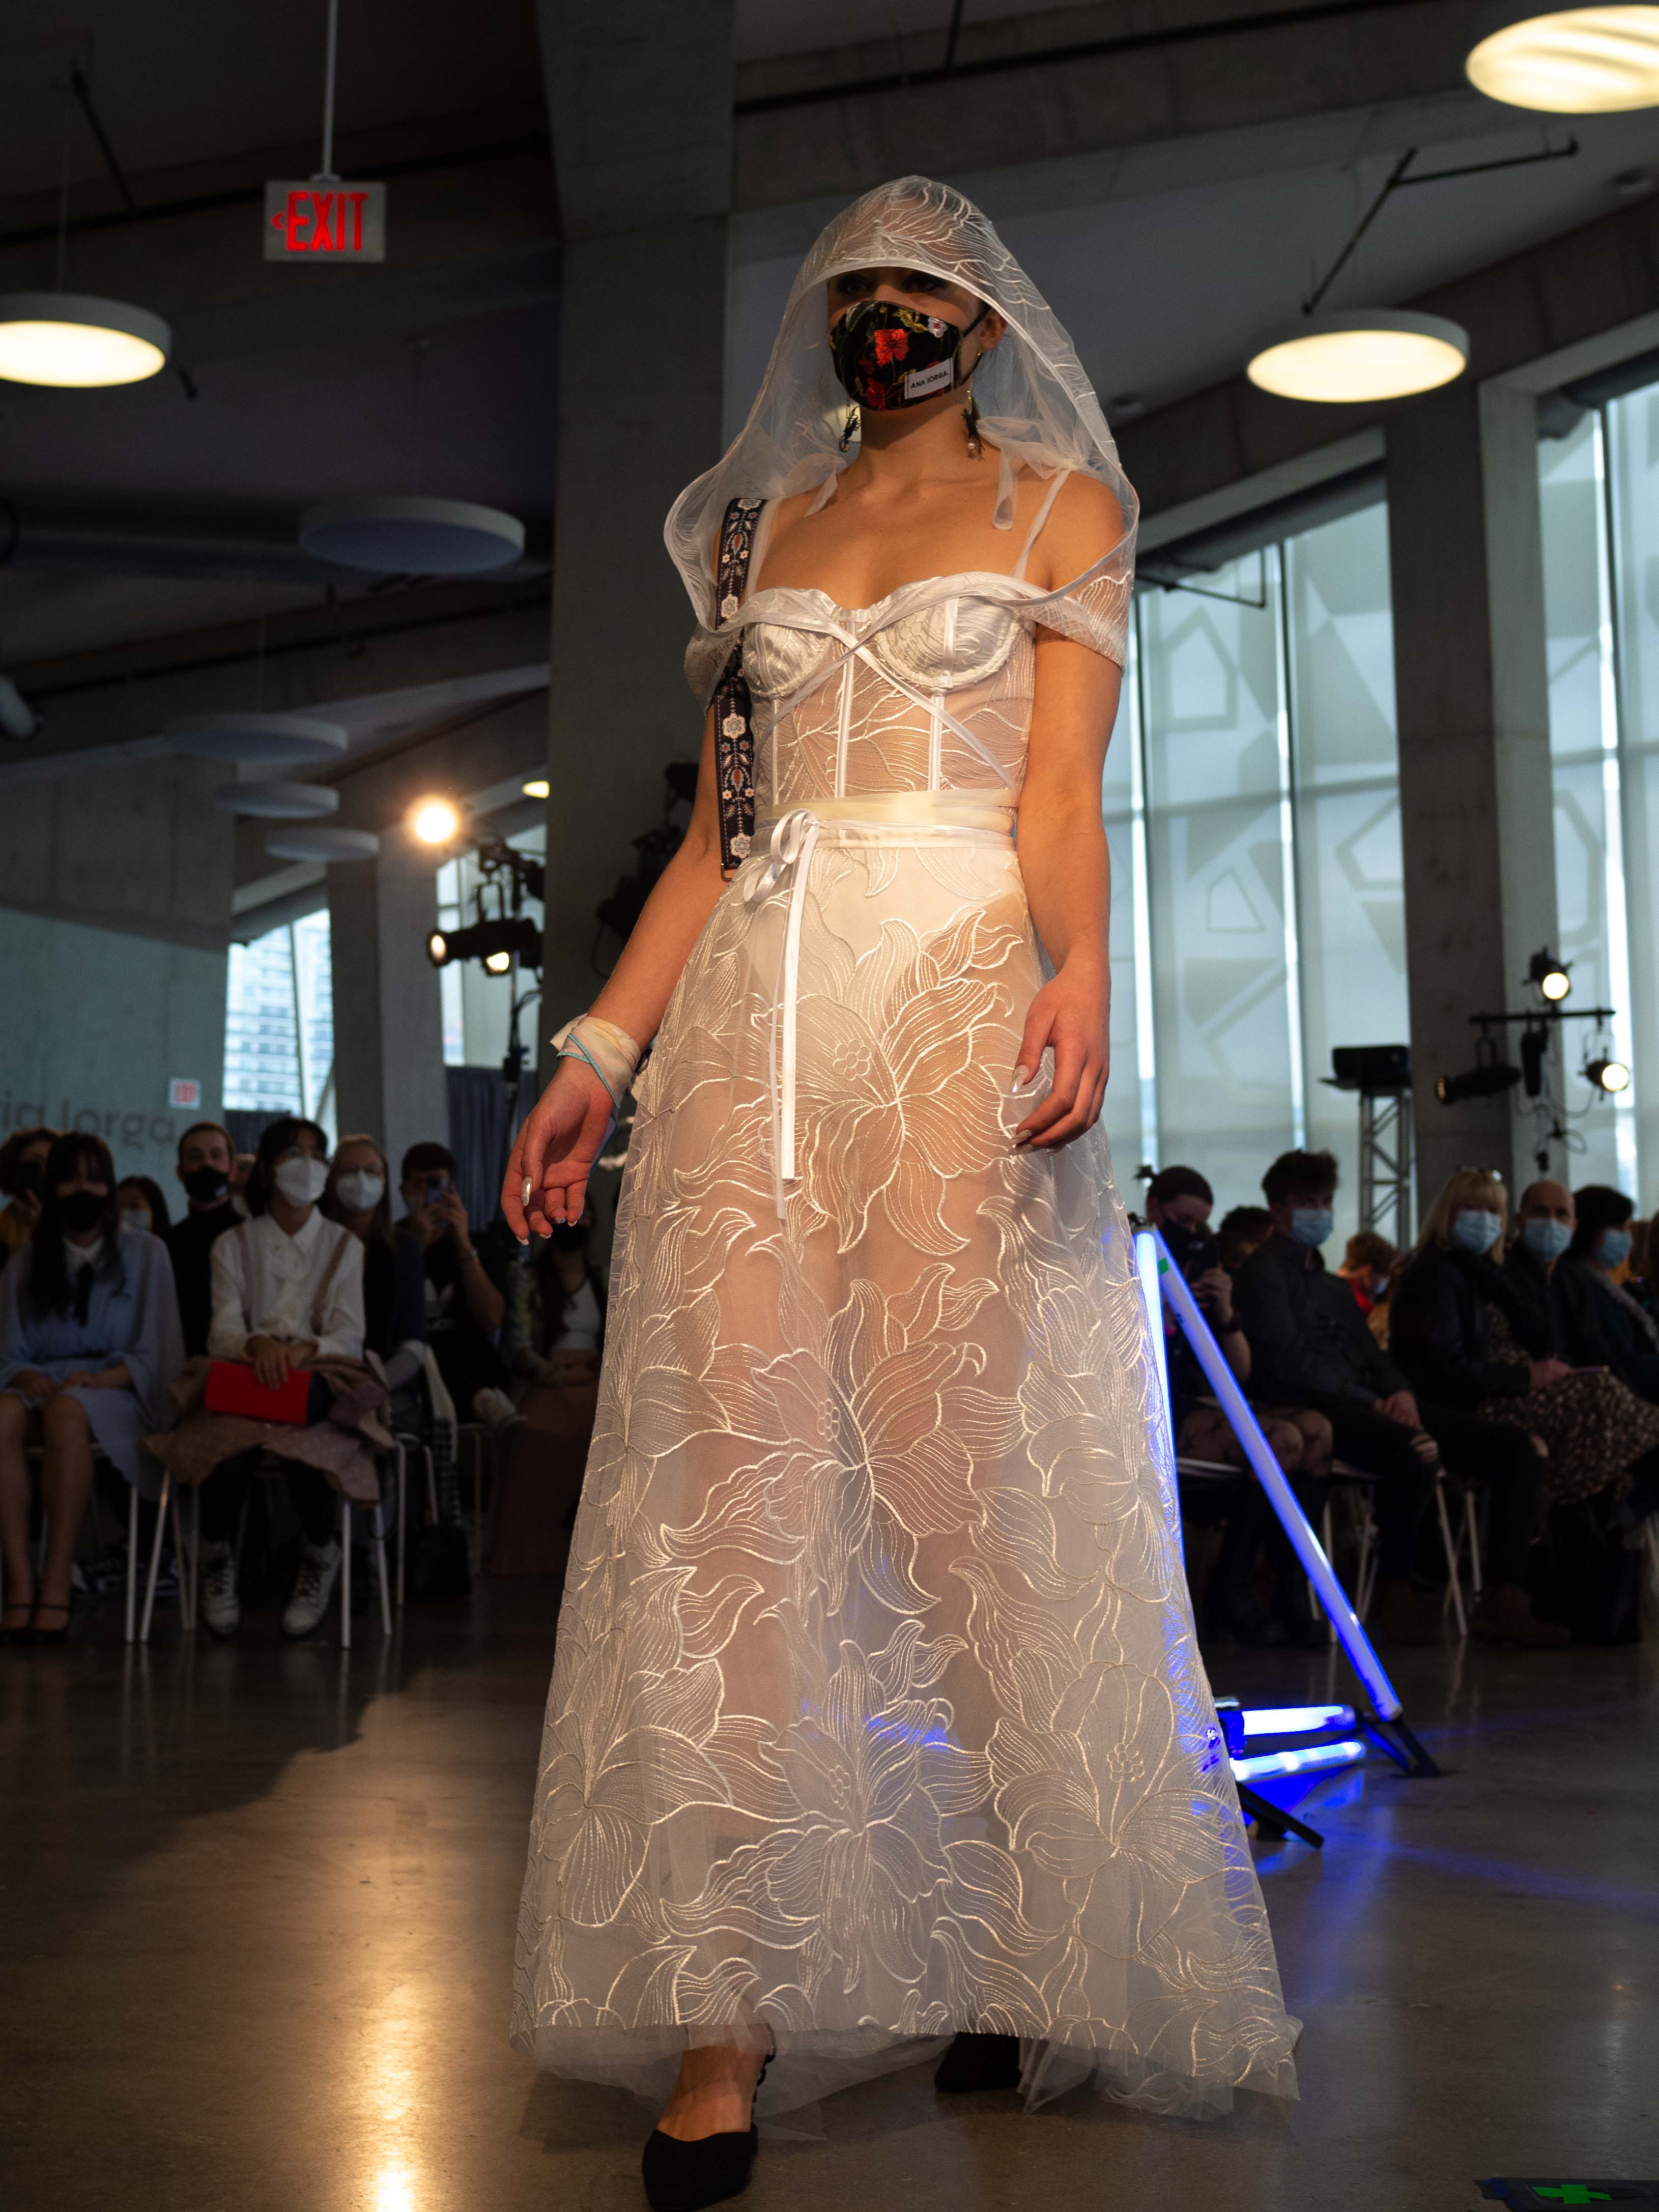 A model on the runway wearing a piece from Anna Maria Iorga's collection